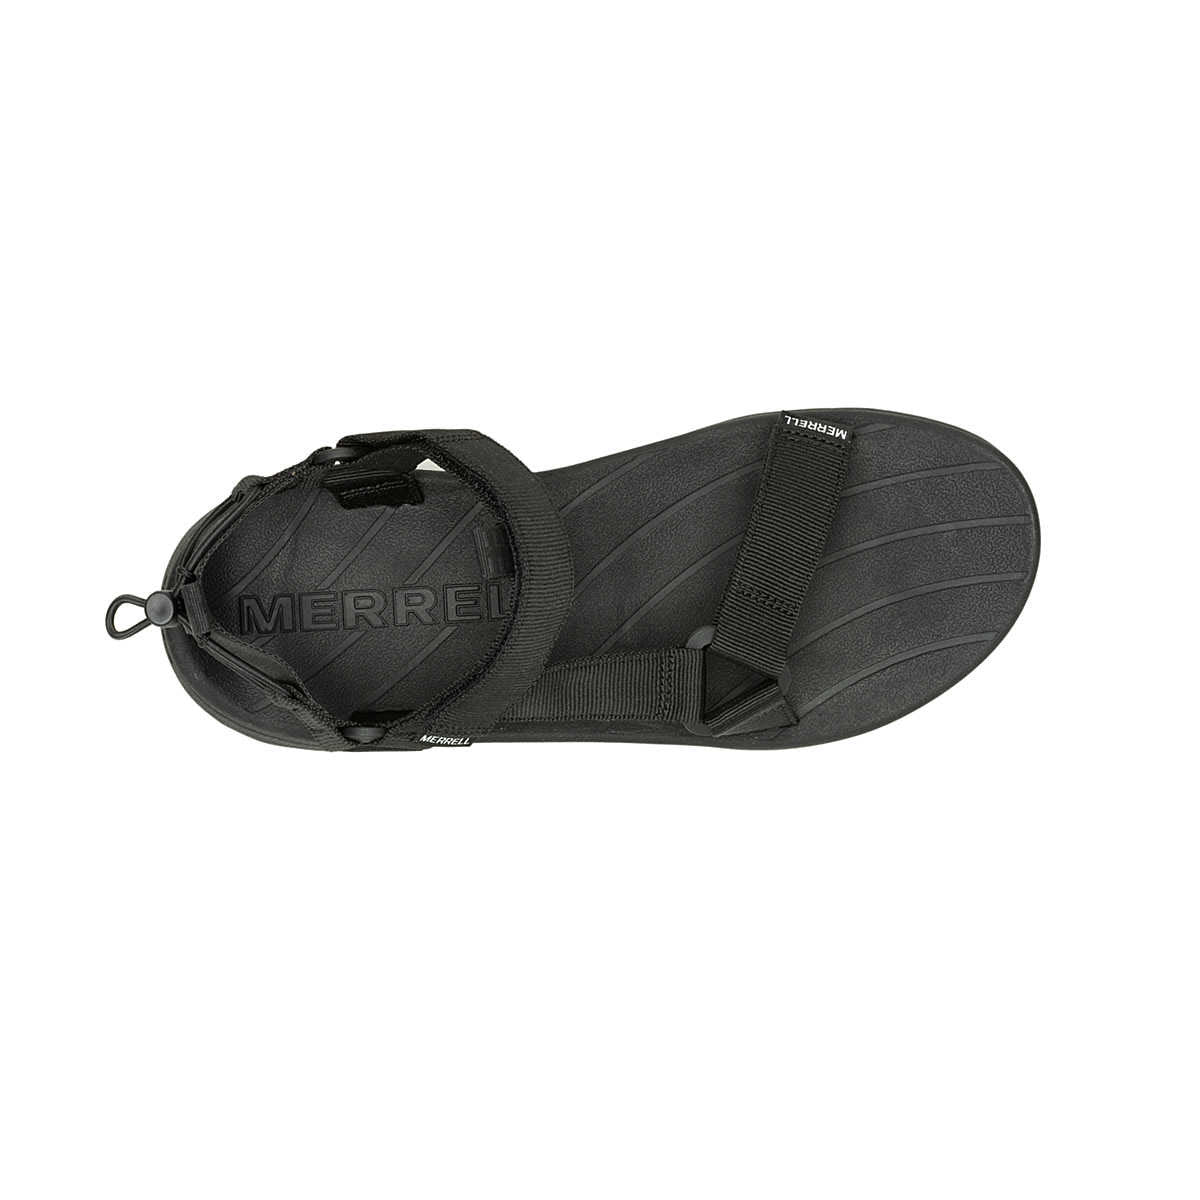 Black Merrell Speed Fusion Web Sport Sandal cover with a textured sole and logo, featuring simple straps and a rear pull loop.